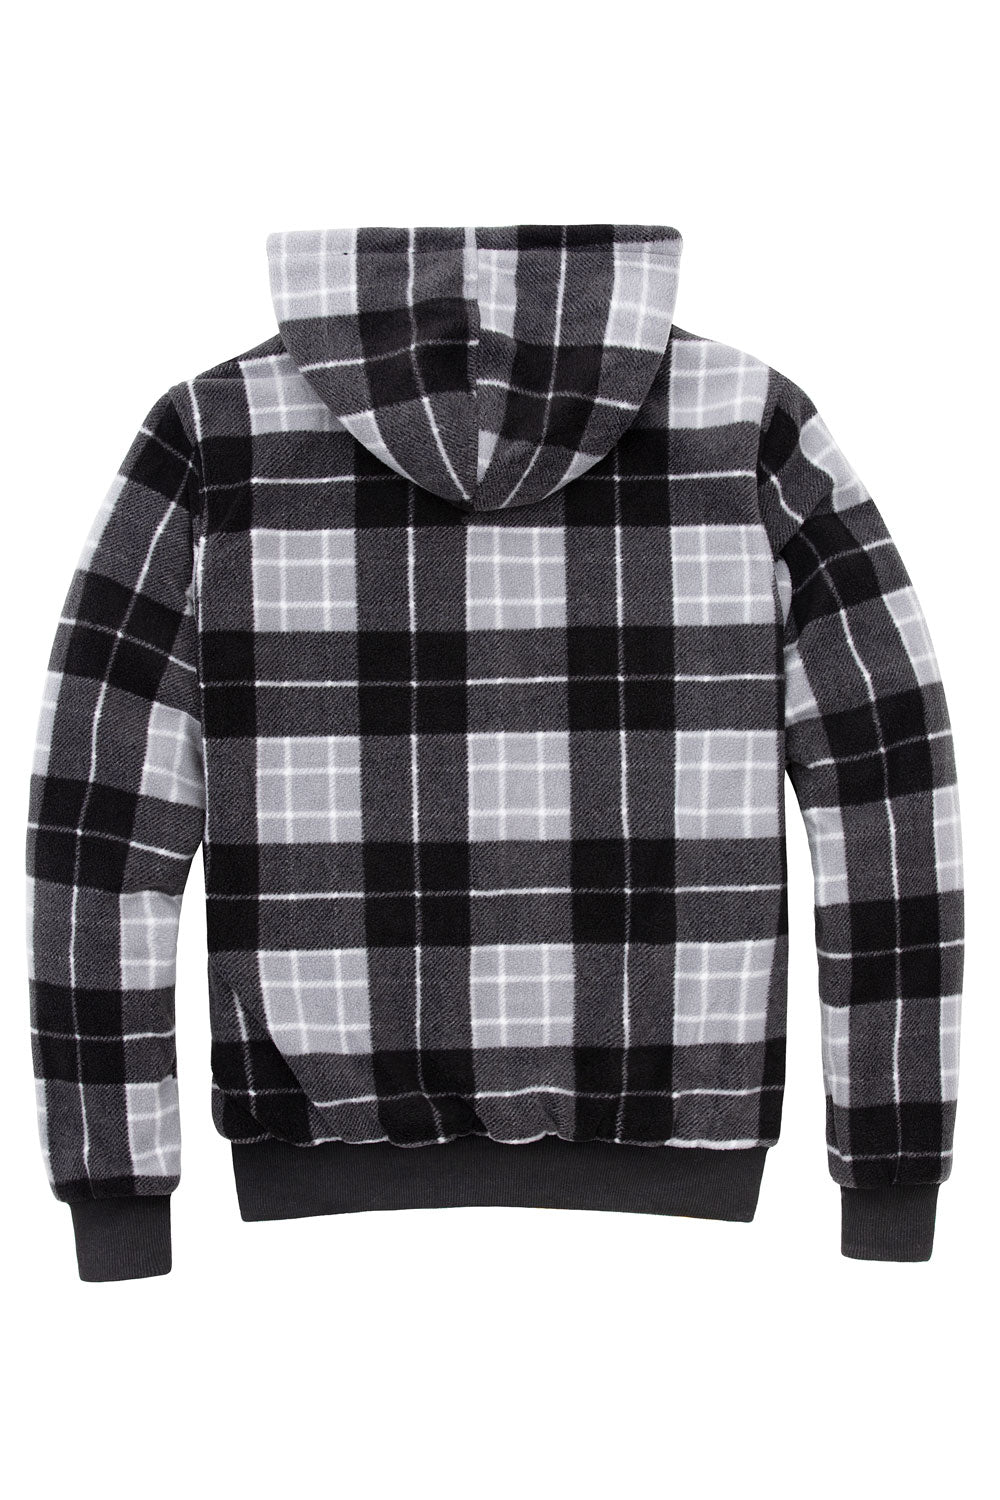 Men's Thick Sherpa Lined Checkered Plaid Hoodie Jacket